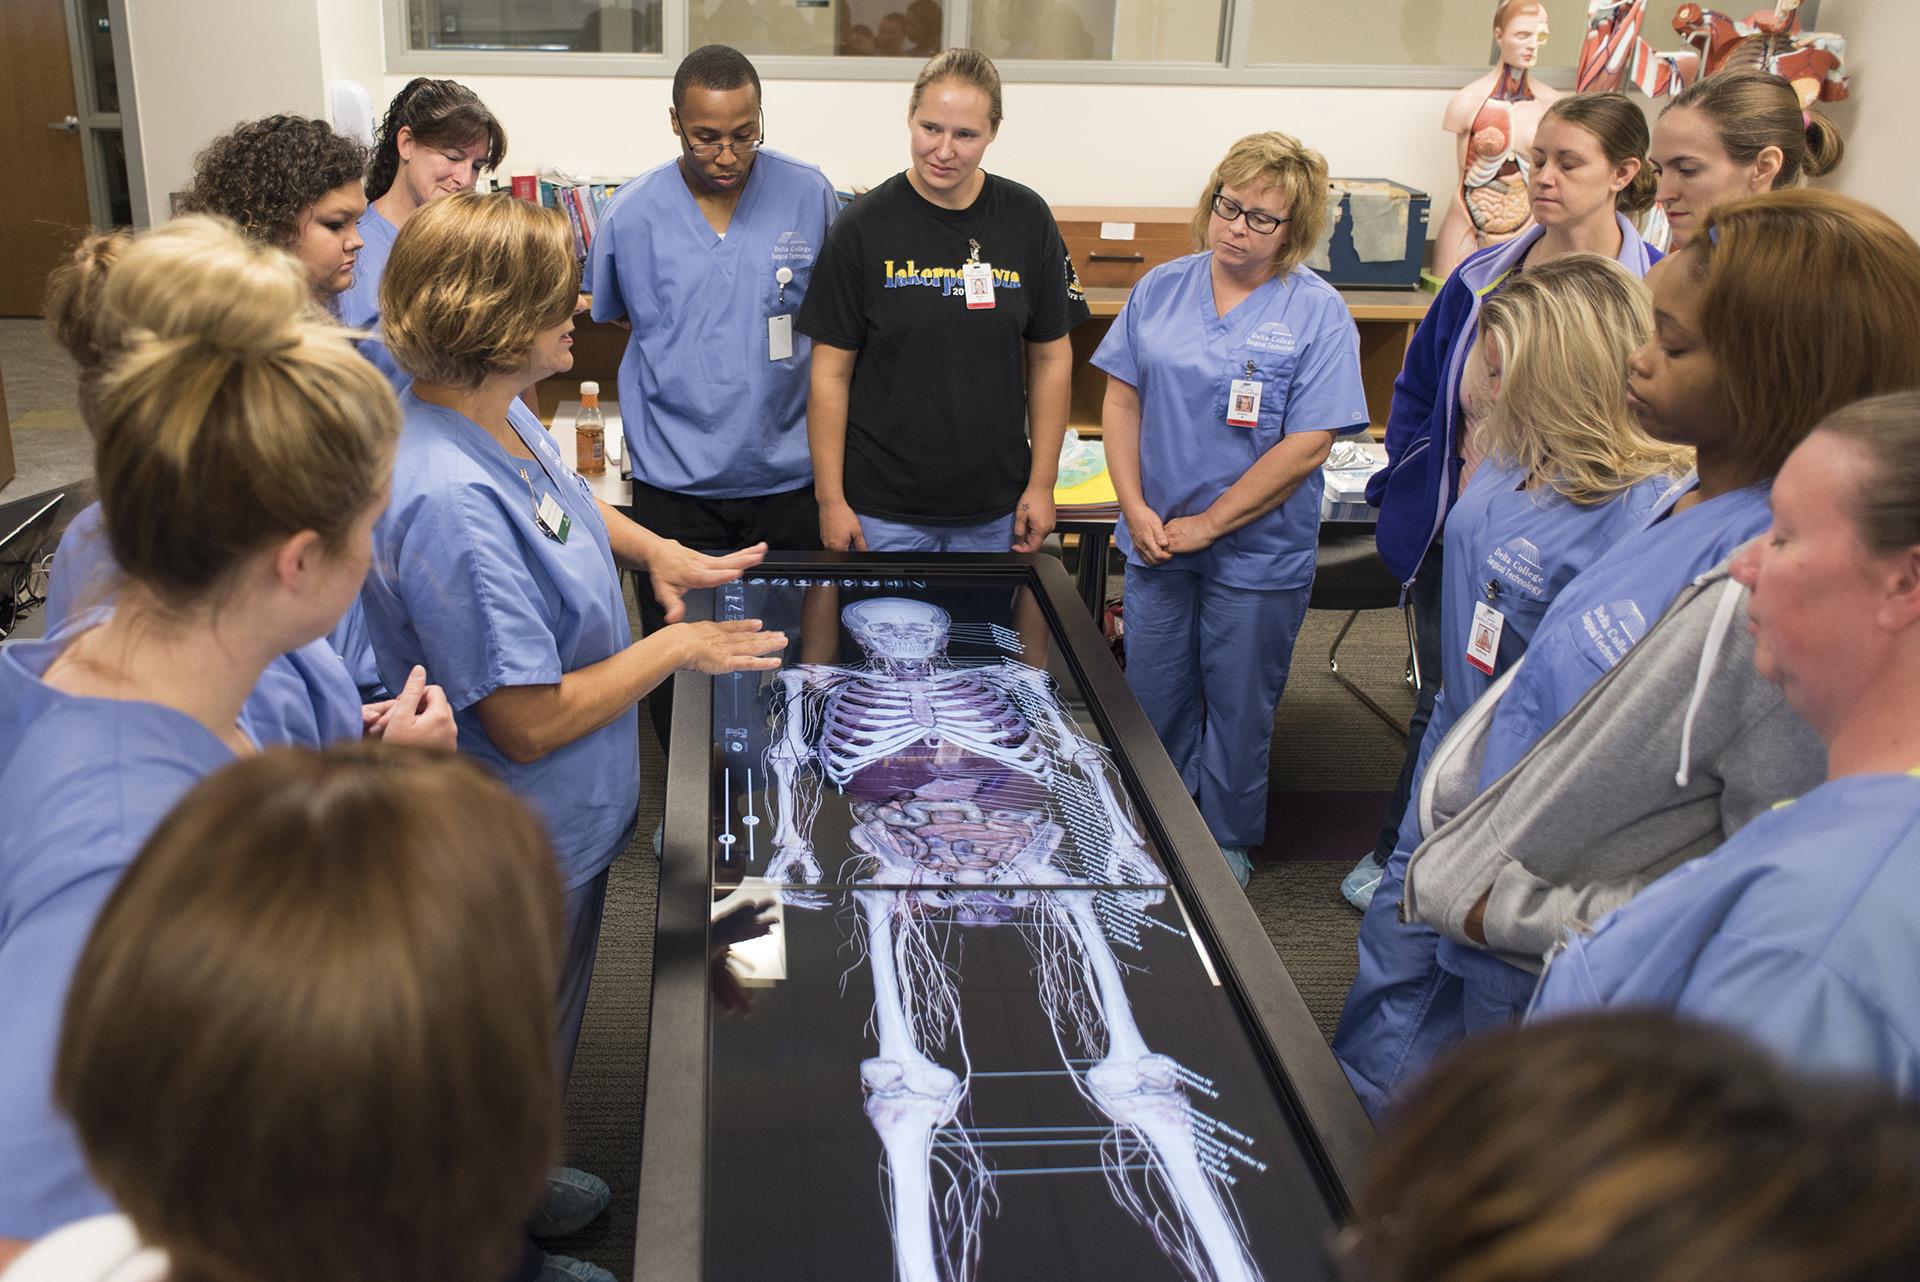 At Delta, you'll find an engaging environment with the latest technology, like the Anatomage table.